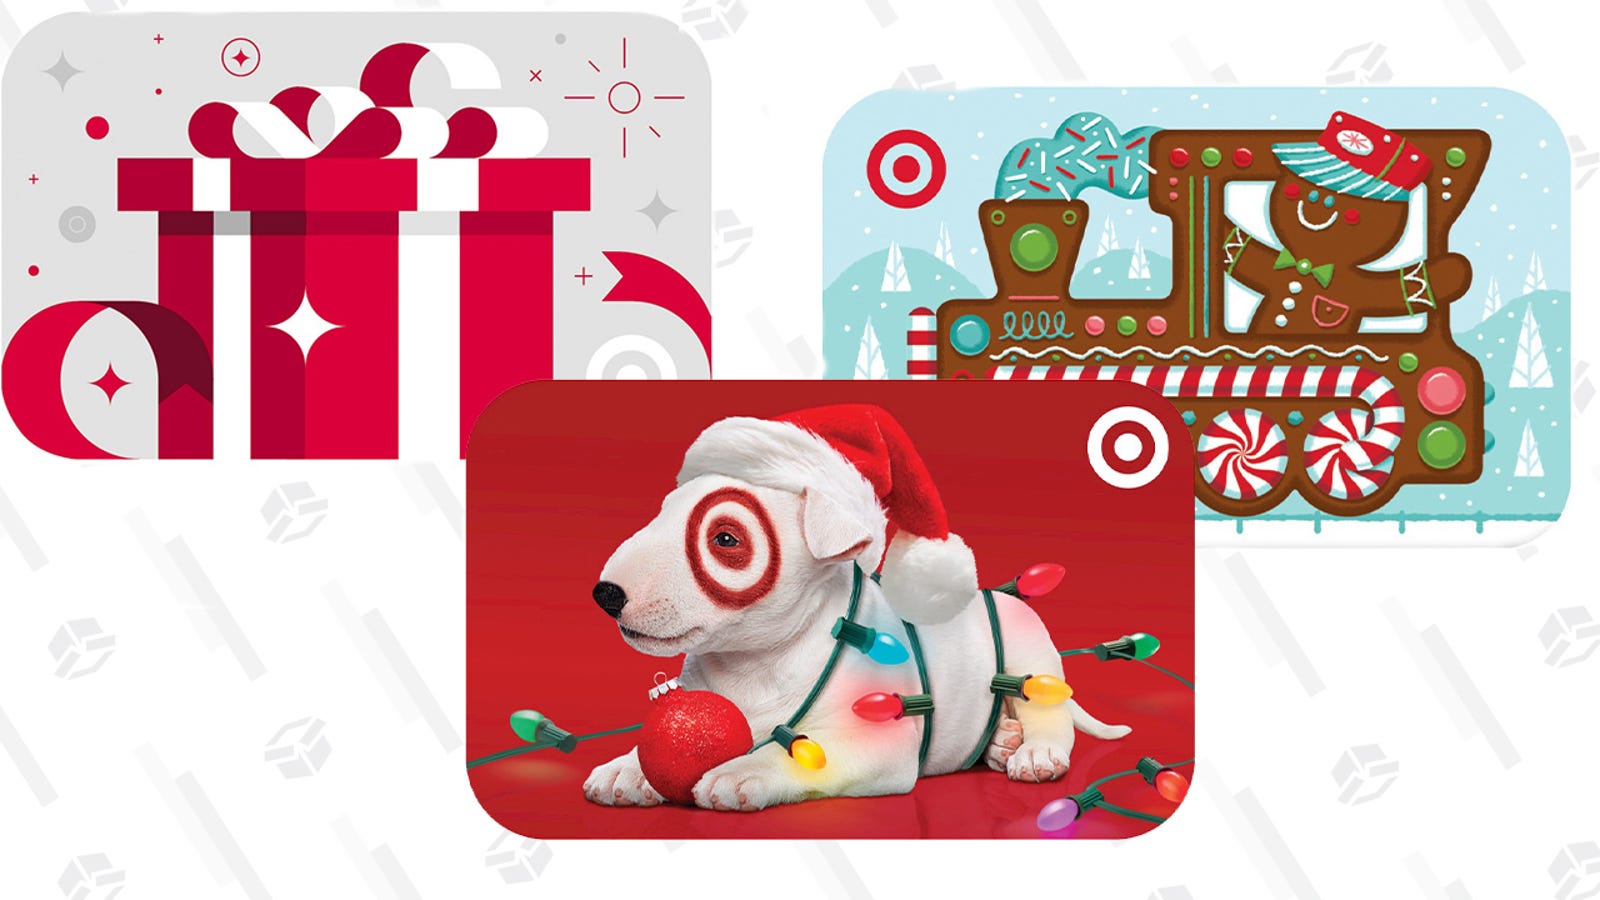 target-gift-cards-are-10-off-today-only-that-s-free-money